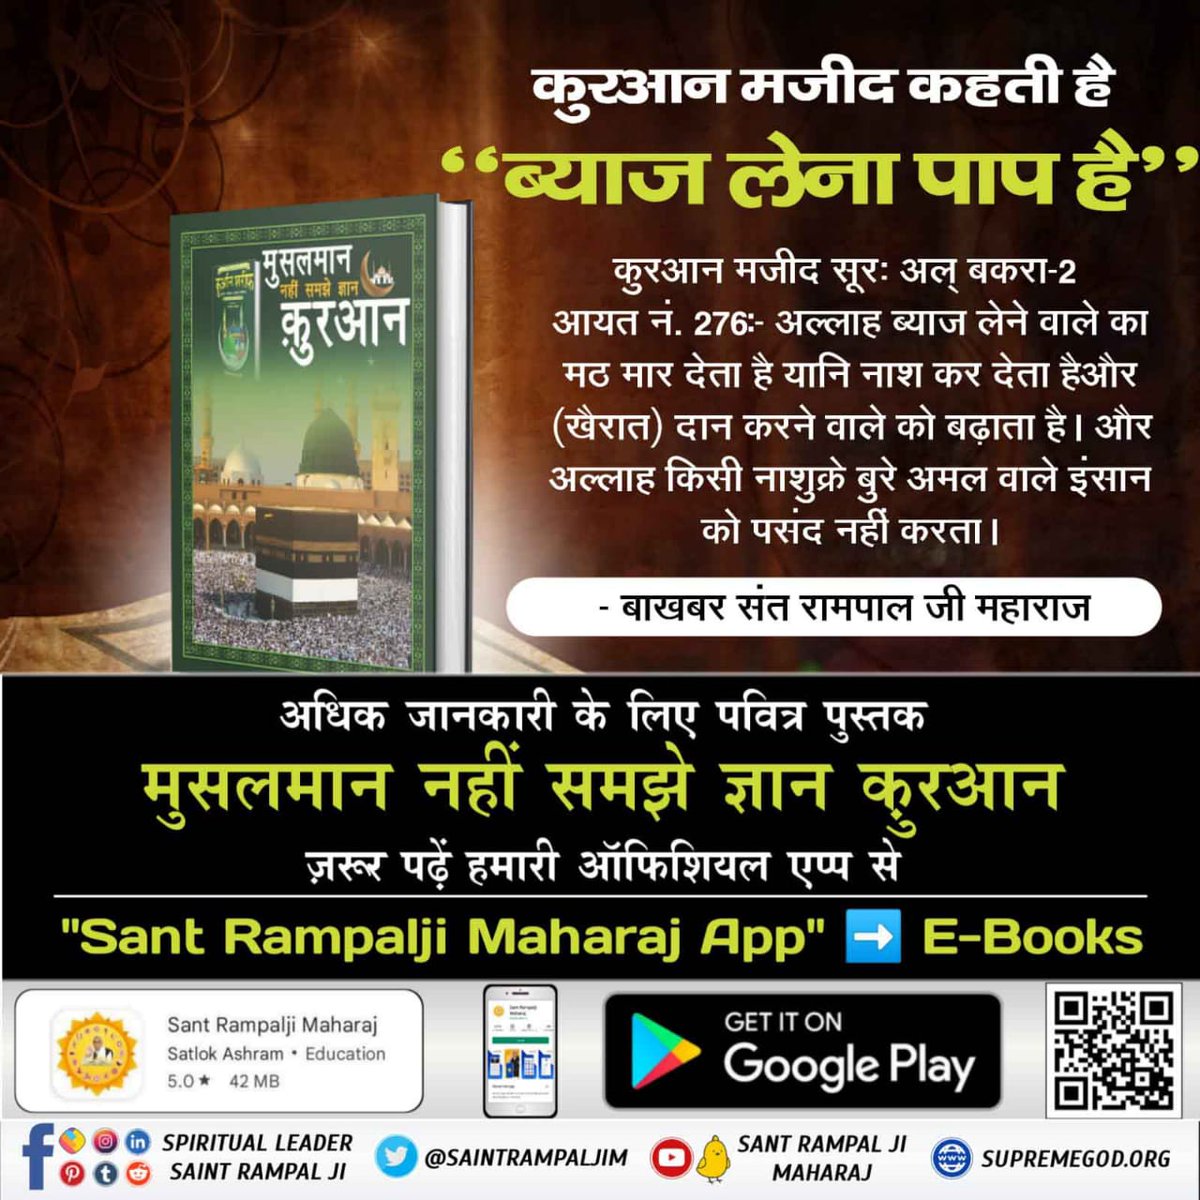 #SundayThoughts 
#HiddenSecrets_Of_TheQuran 
To which God is the one who speaks Quran Sharif referring to above himself?
For more information, must read the holy book 'Musalman nahi samjhe Gyan Quran'.
From Our Official App
'Sant Rampalji Maharaj A

Last Prophet Sant Rampal Ji